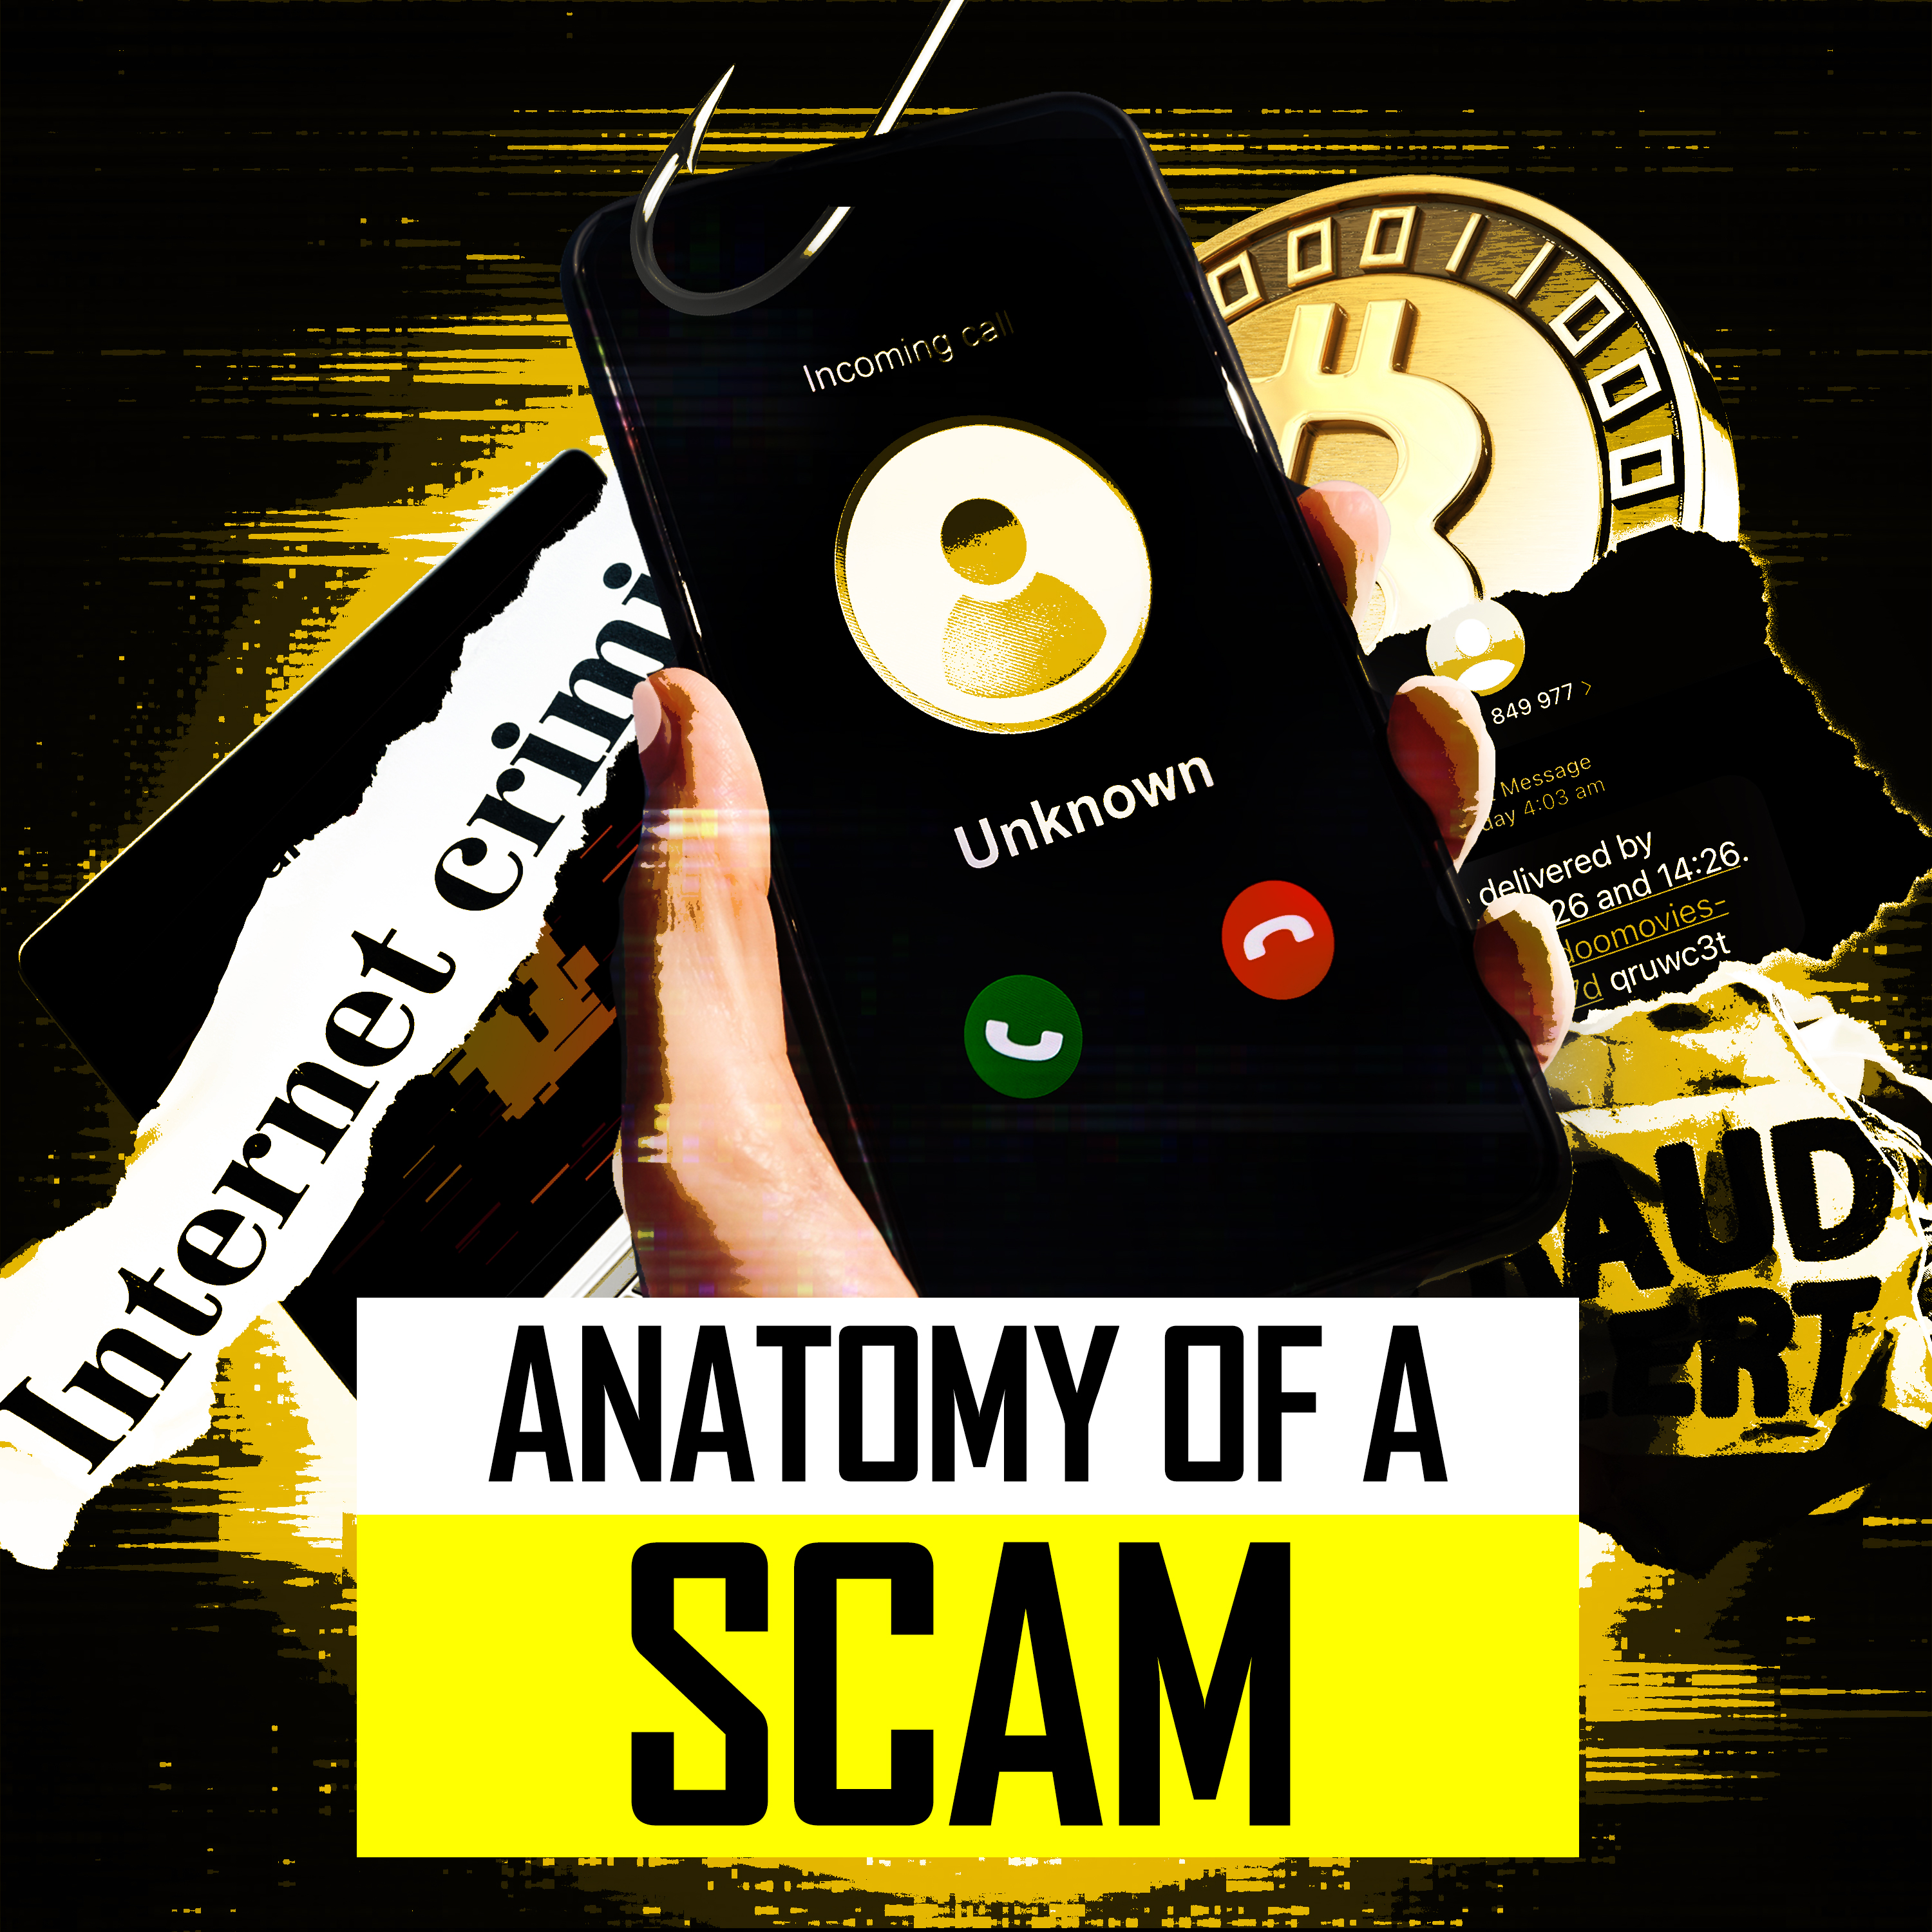 Coming soon: Anatomy of a Scam